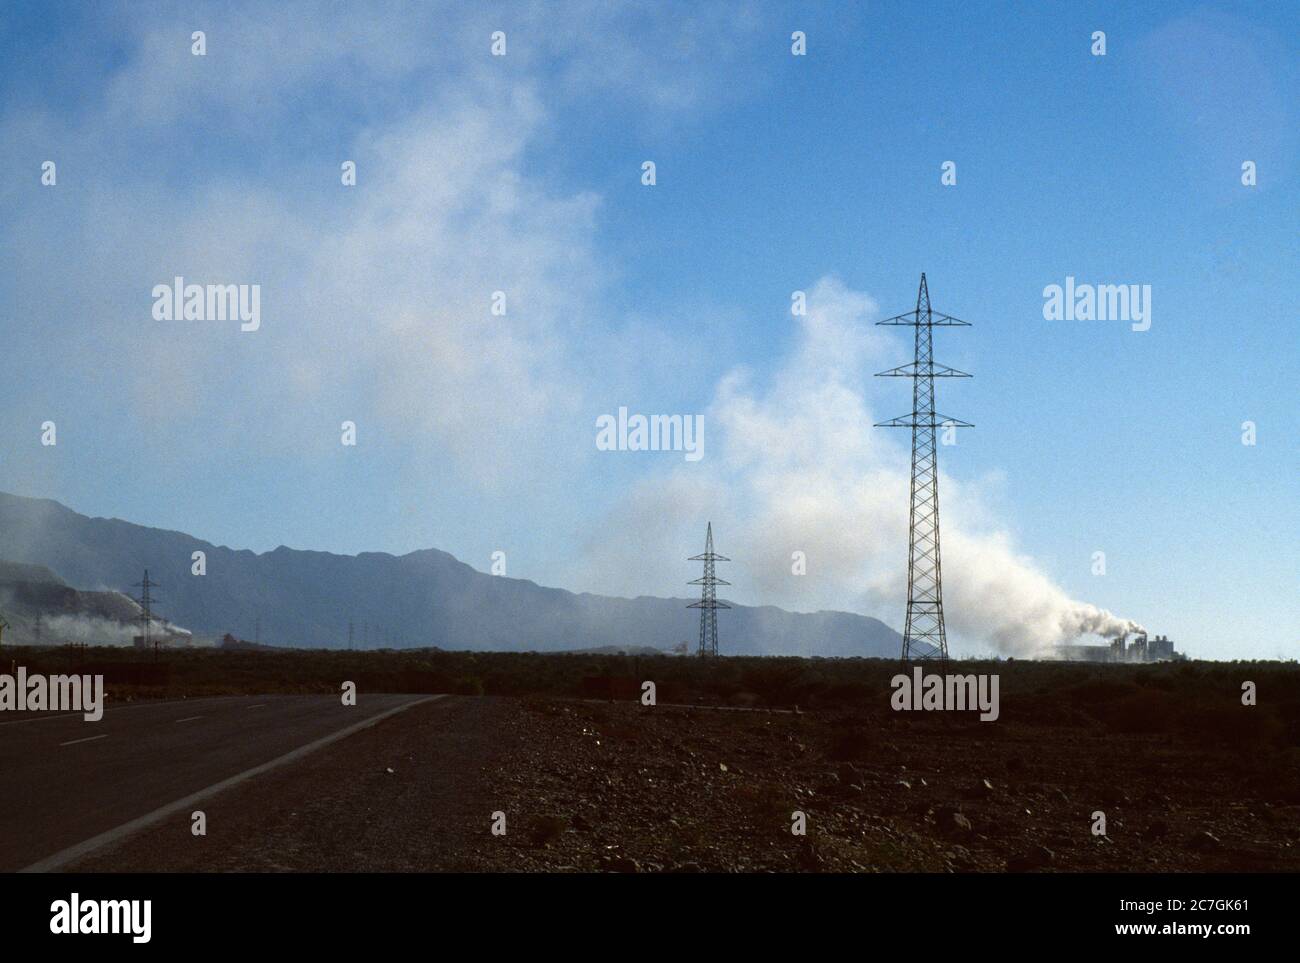 Dubai UAE Electricity Pylons and Factories in the distance in Scrub Desert Stock Photo